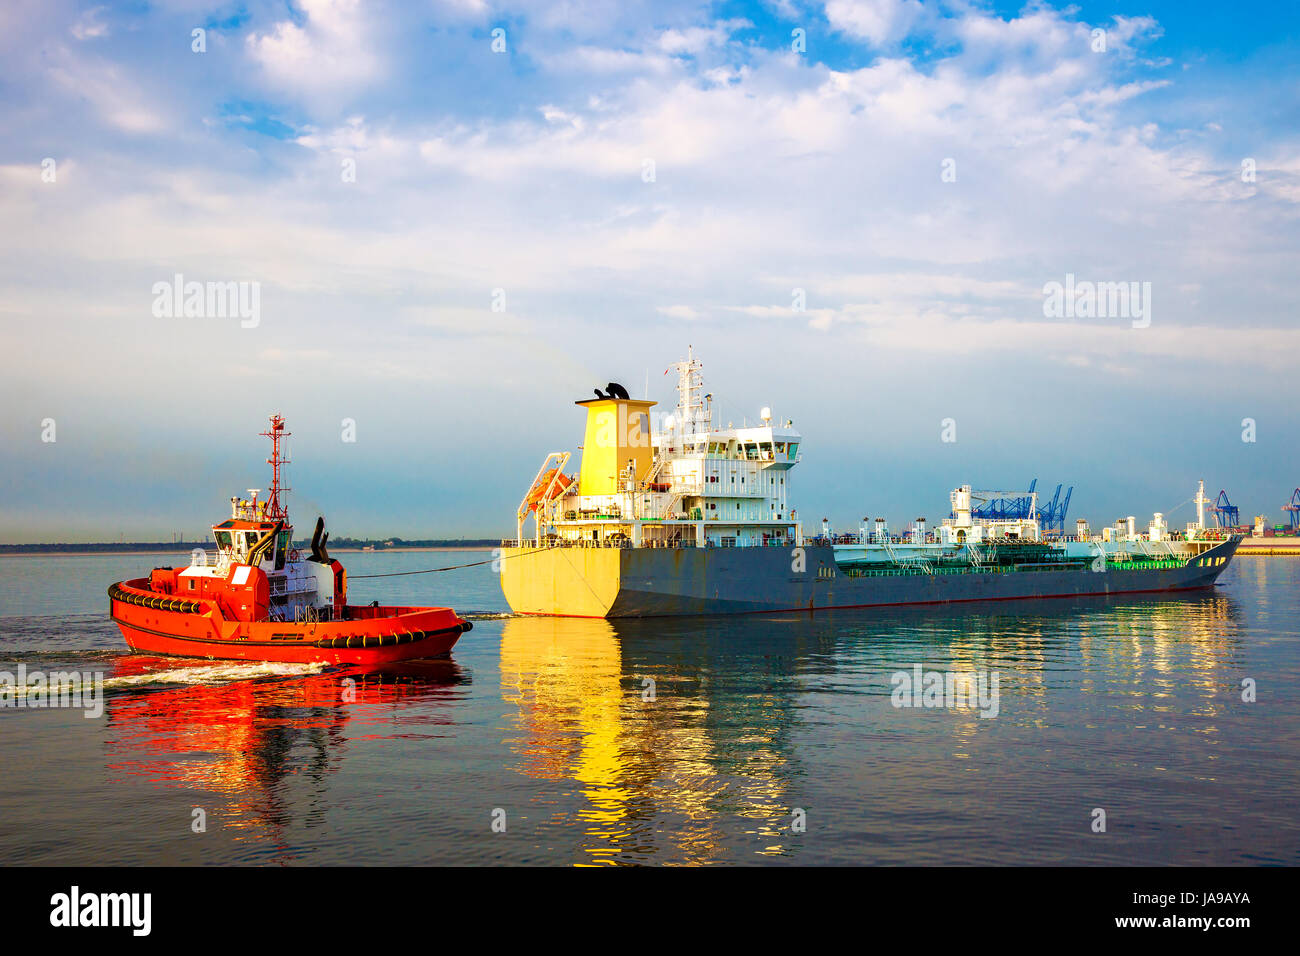 Tugboat towing tanker ship in port. Stock Photo